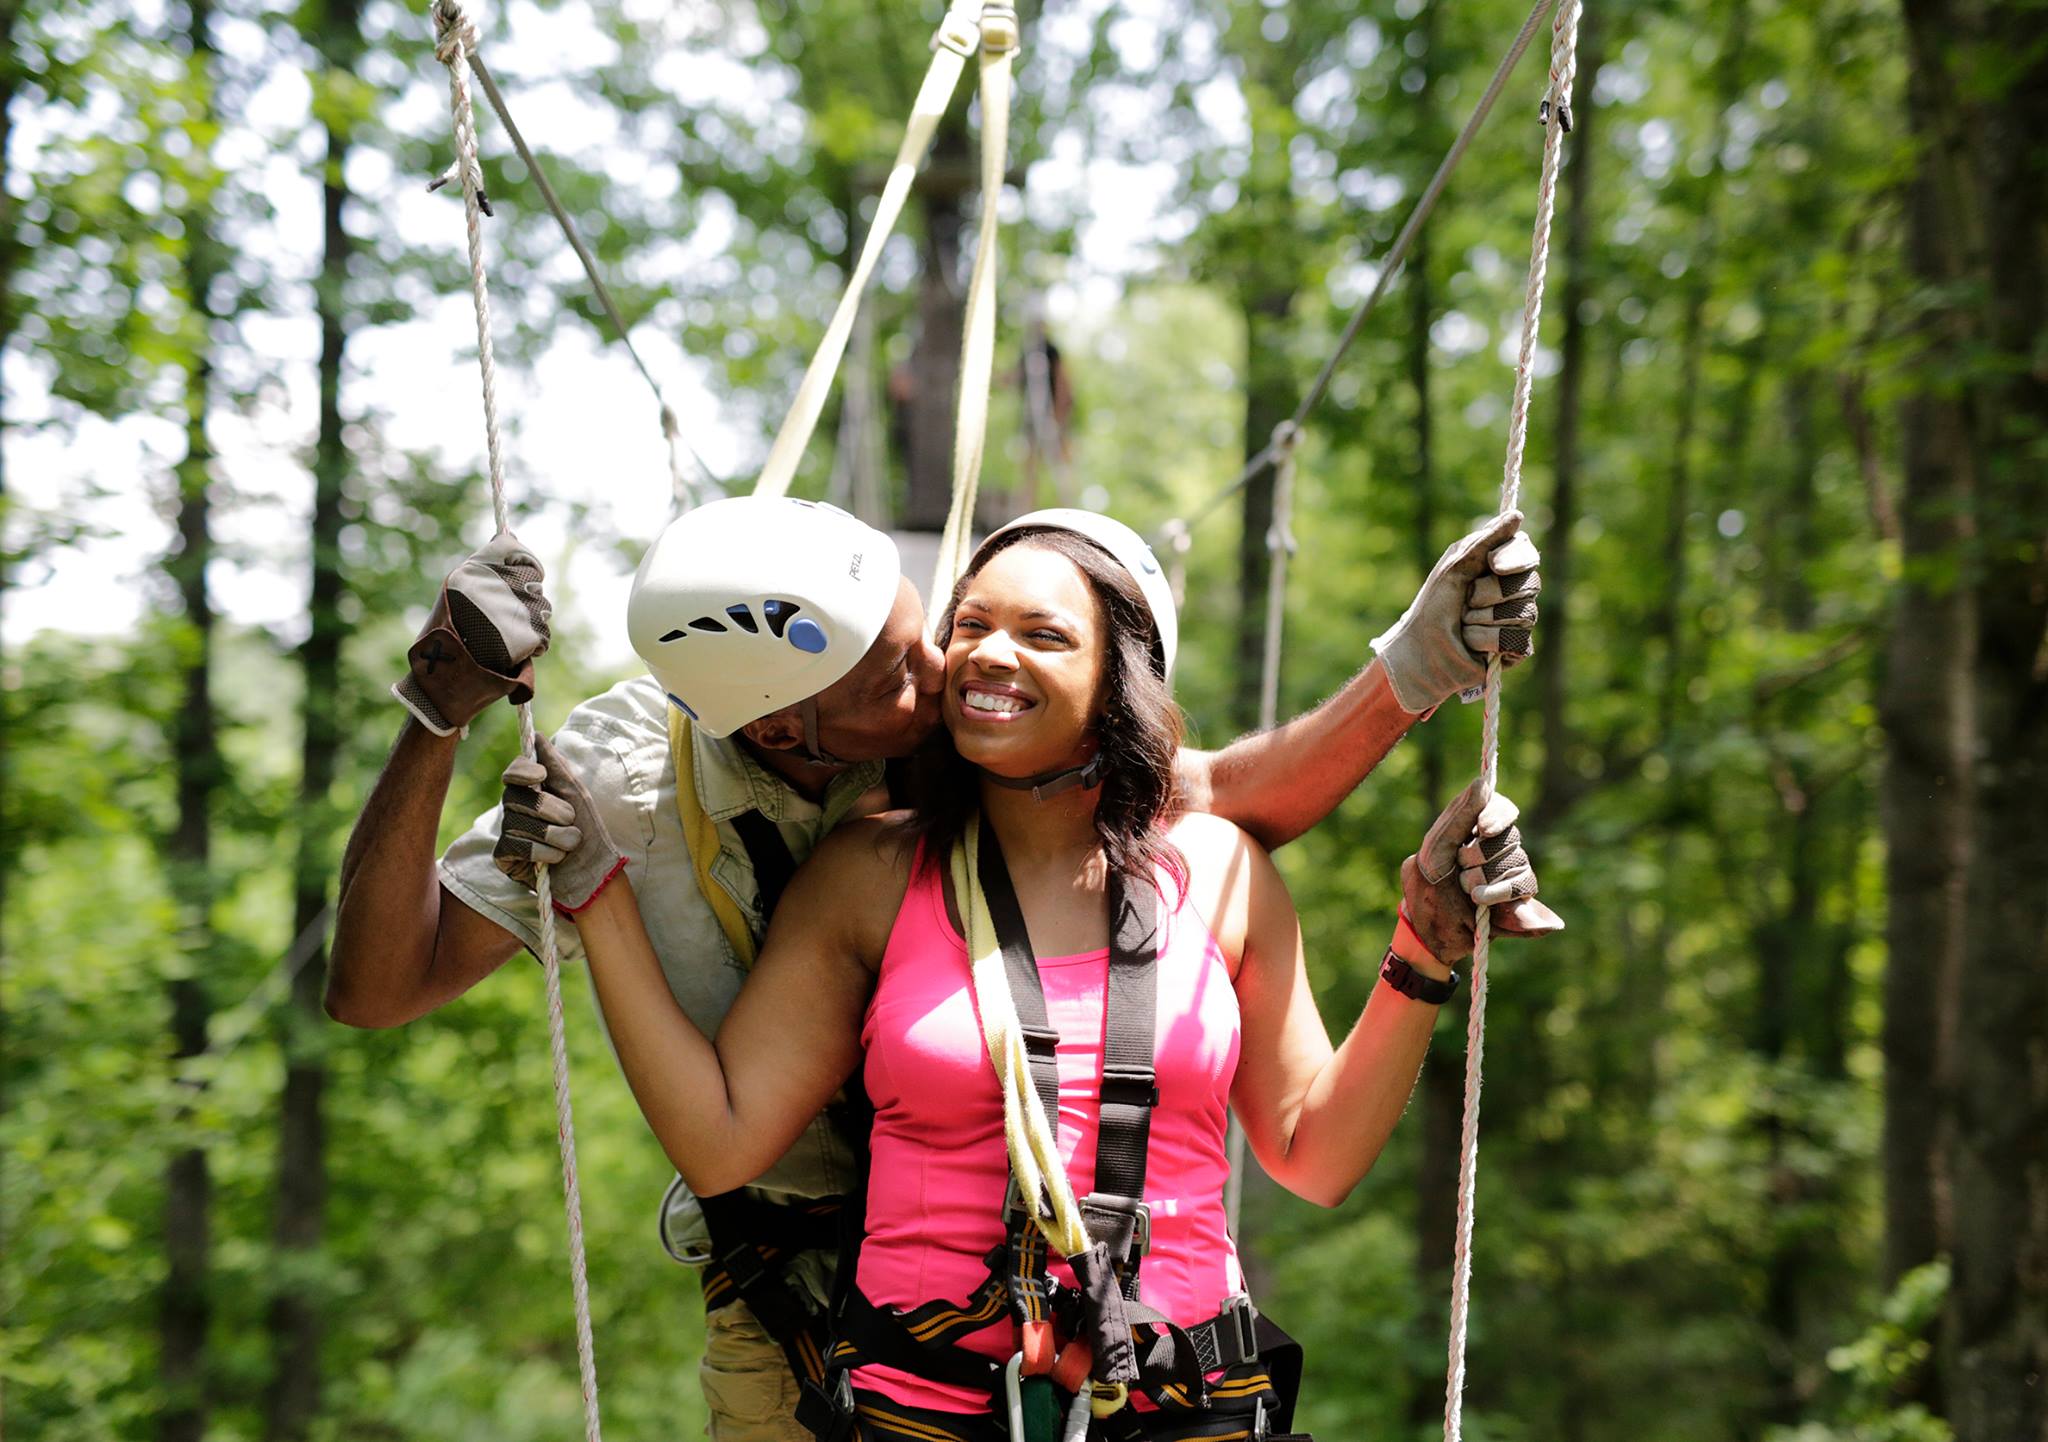 Zip Lining is the Perfect Date Adventure Activity